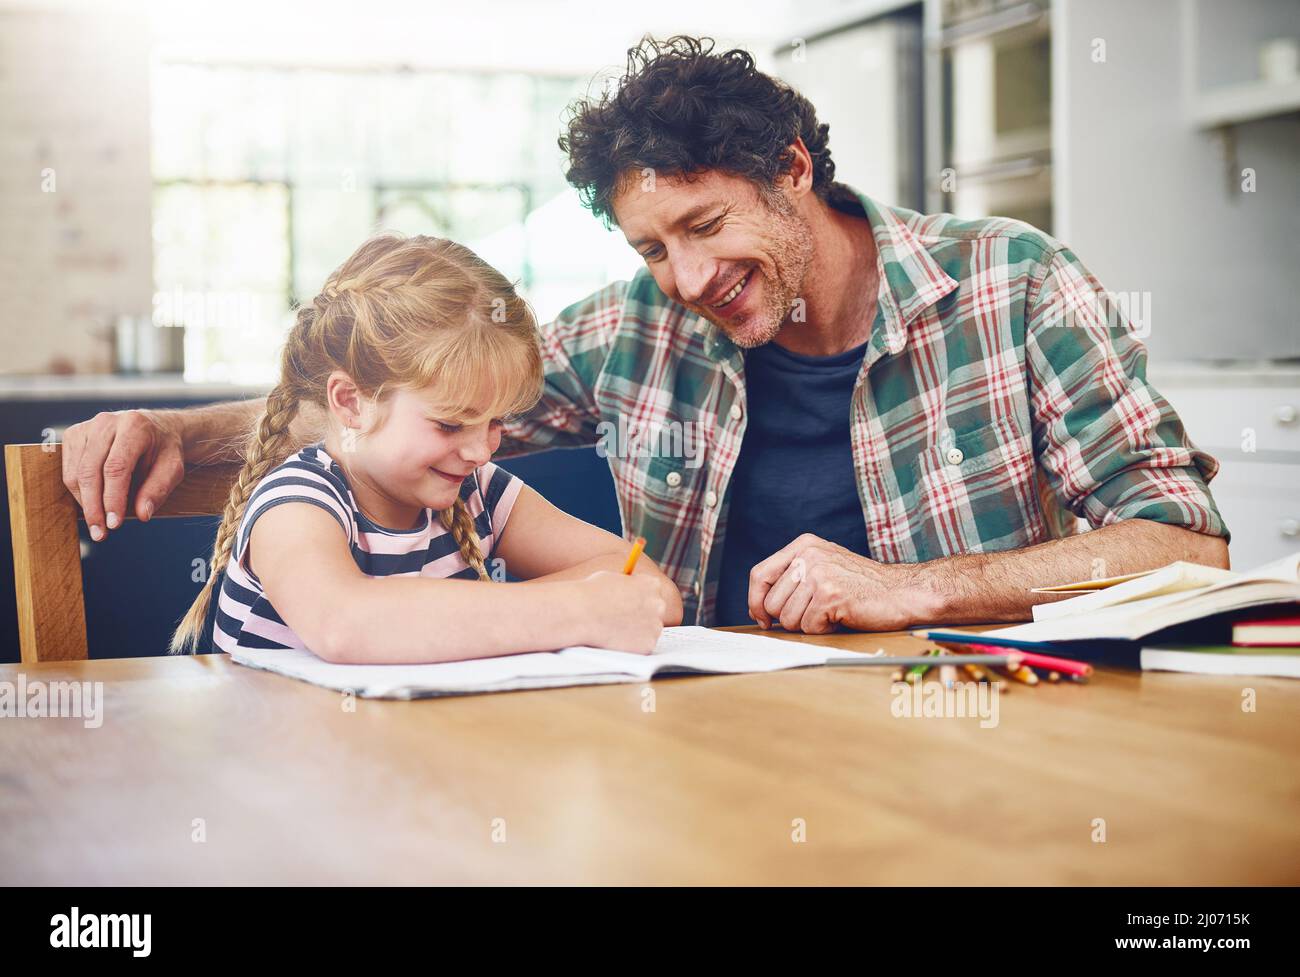 Its important to provide encouragement to kids. Cropped shot of a father helping his daughter with her homework. Stock Photo